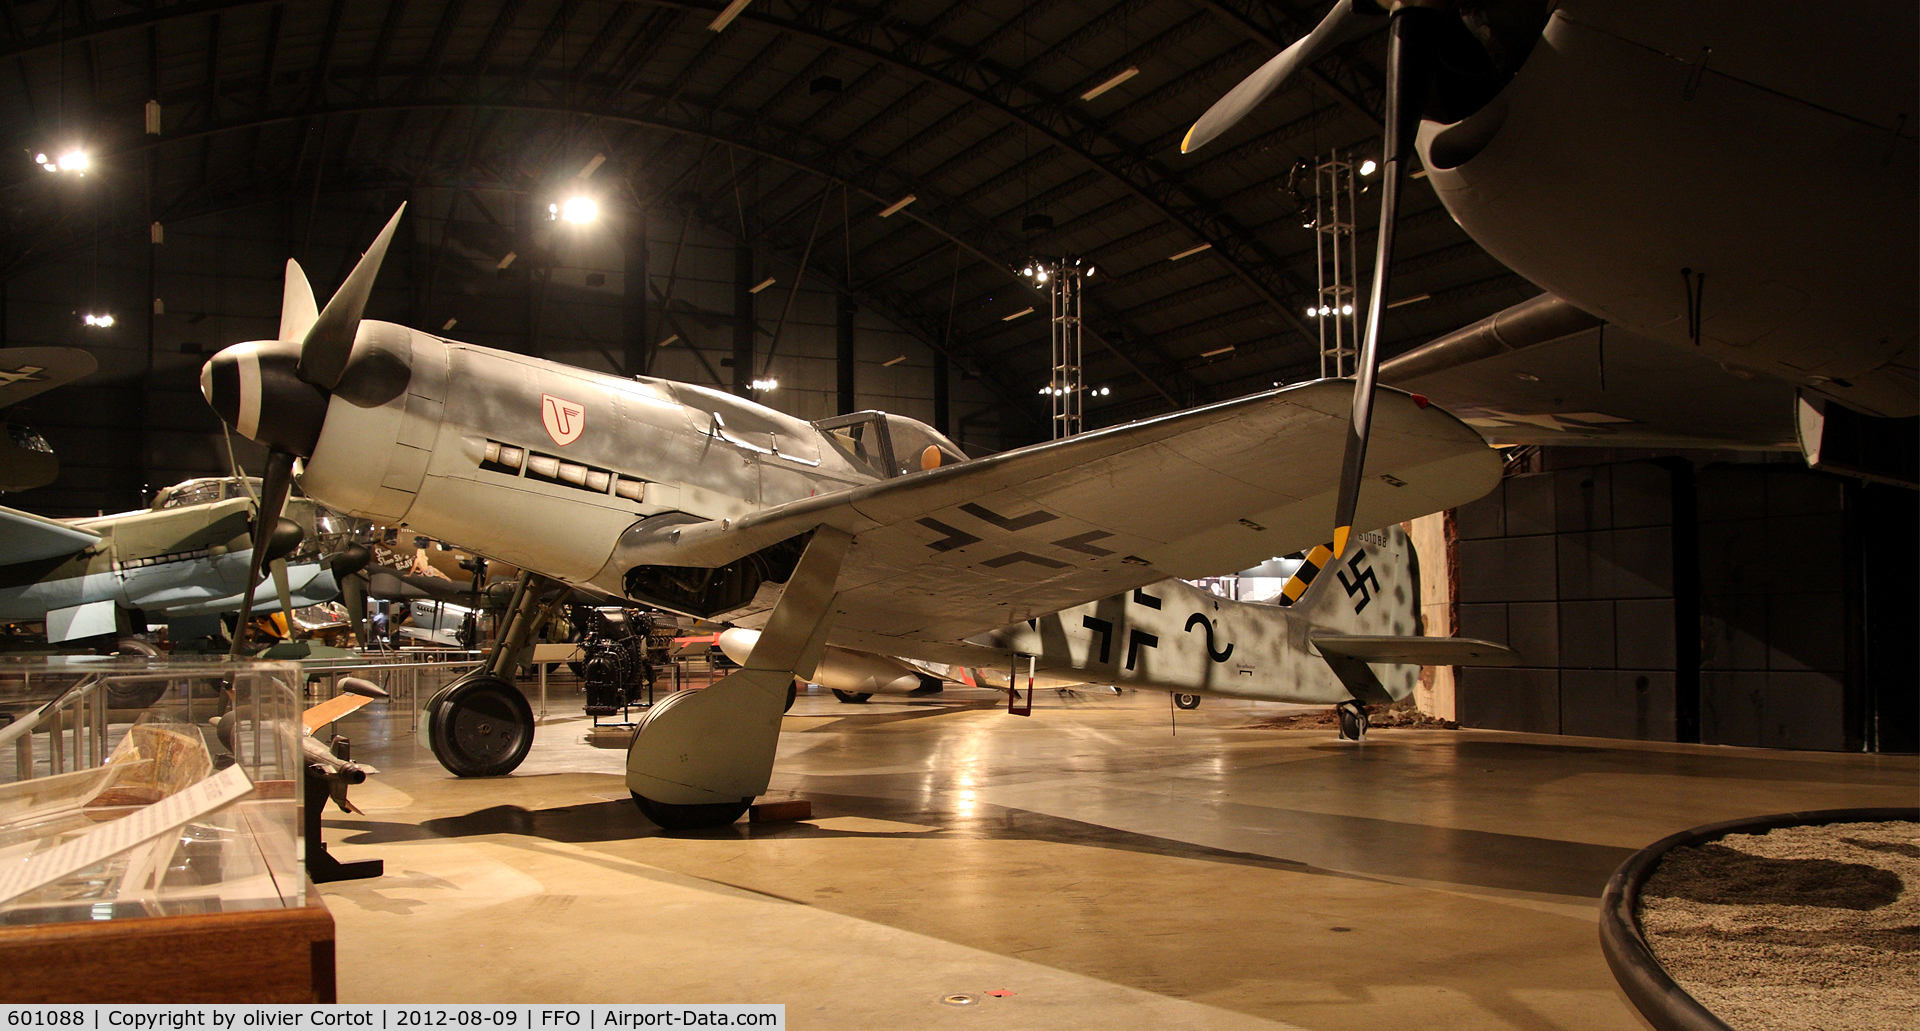 601088, Focke-Wulf Fw-190D-9 C/N Not found 601088, on loan from the NASM museum